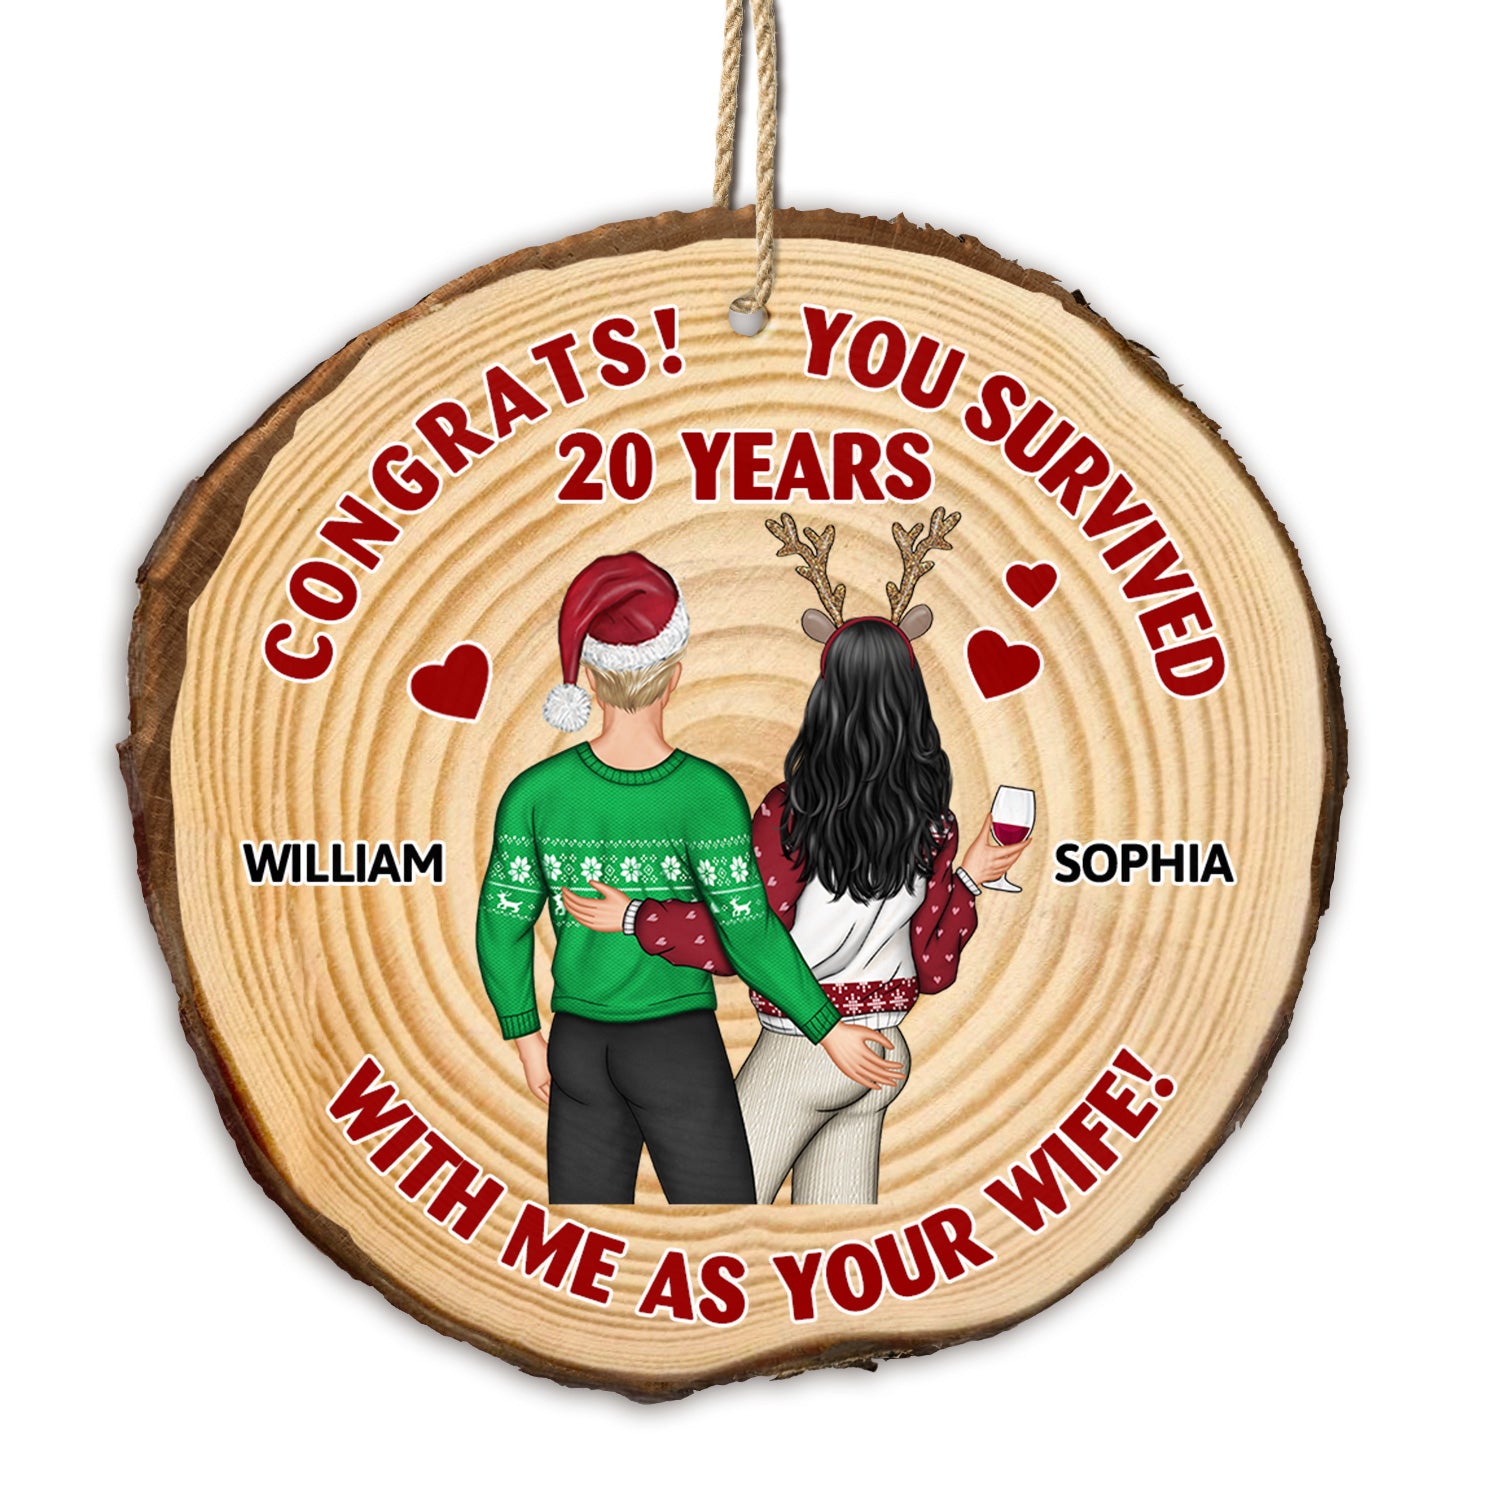 Congrats You Survived - Anniversary, Christmas Gift For Couples, Husband, Wife - Personalized Wood Slice Ornament